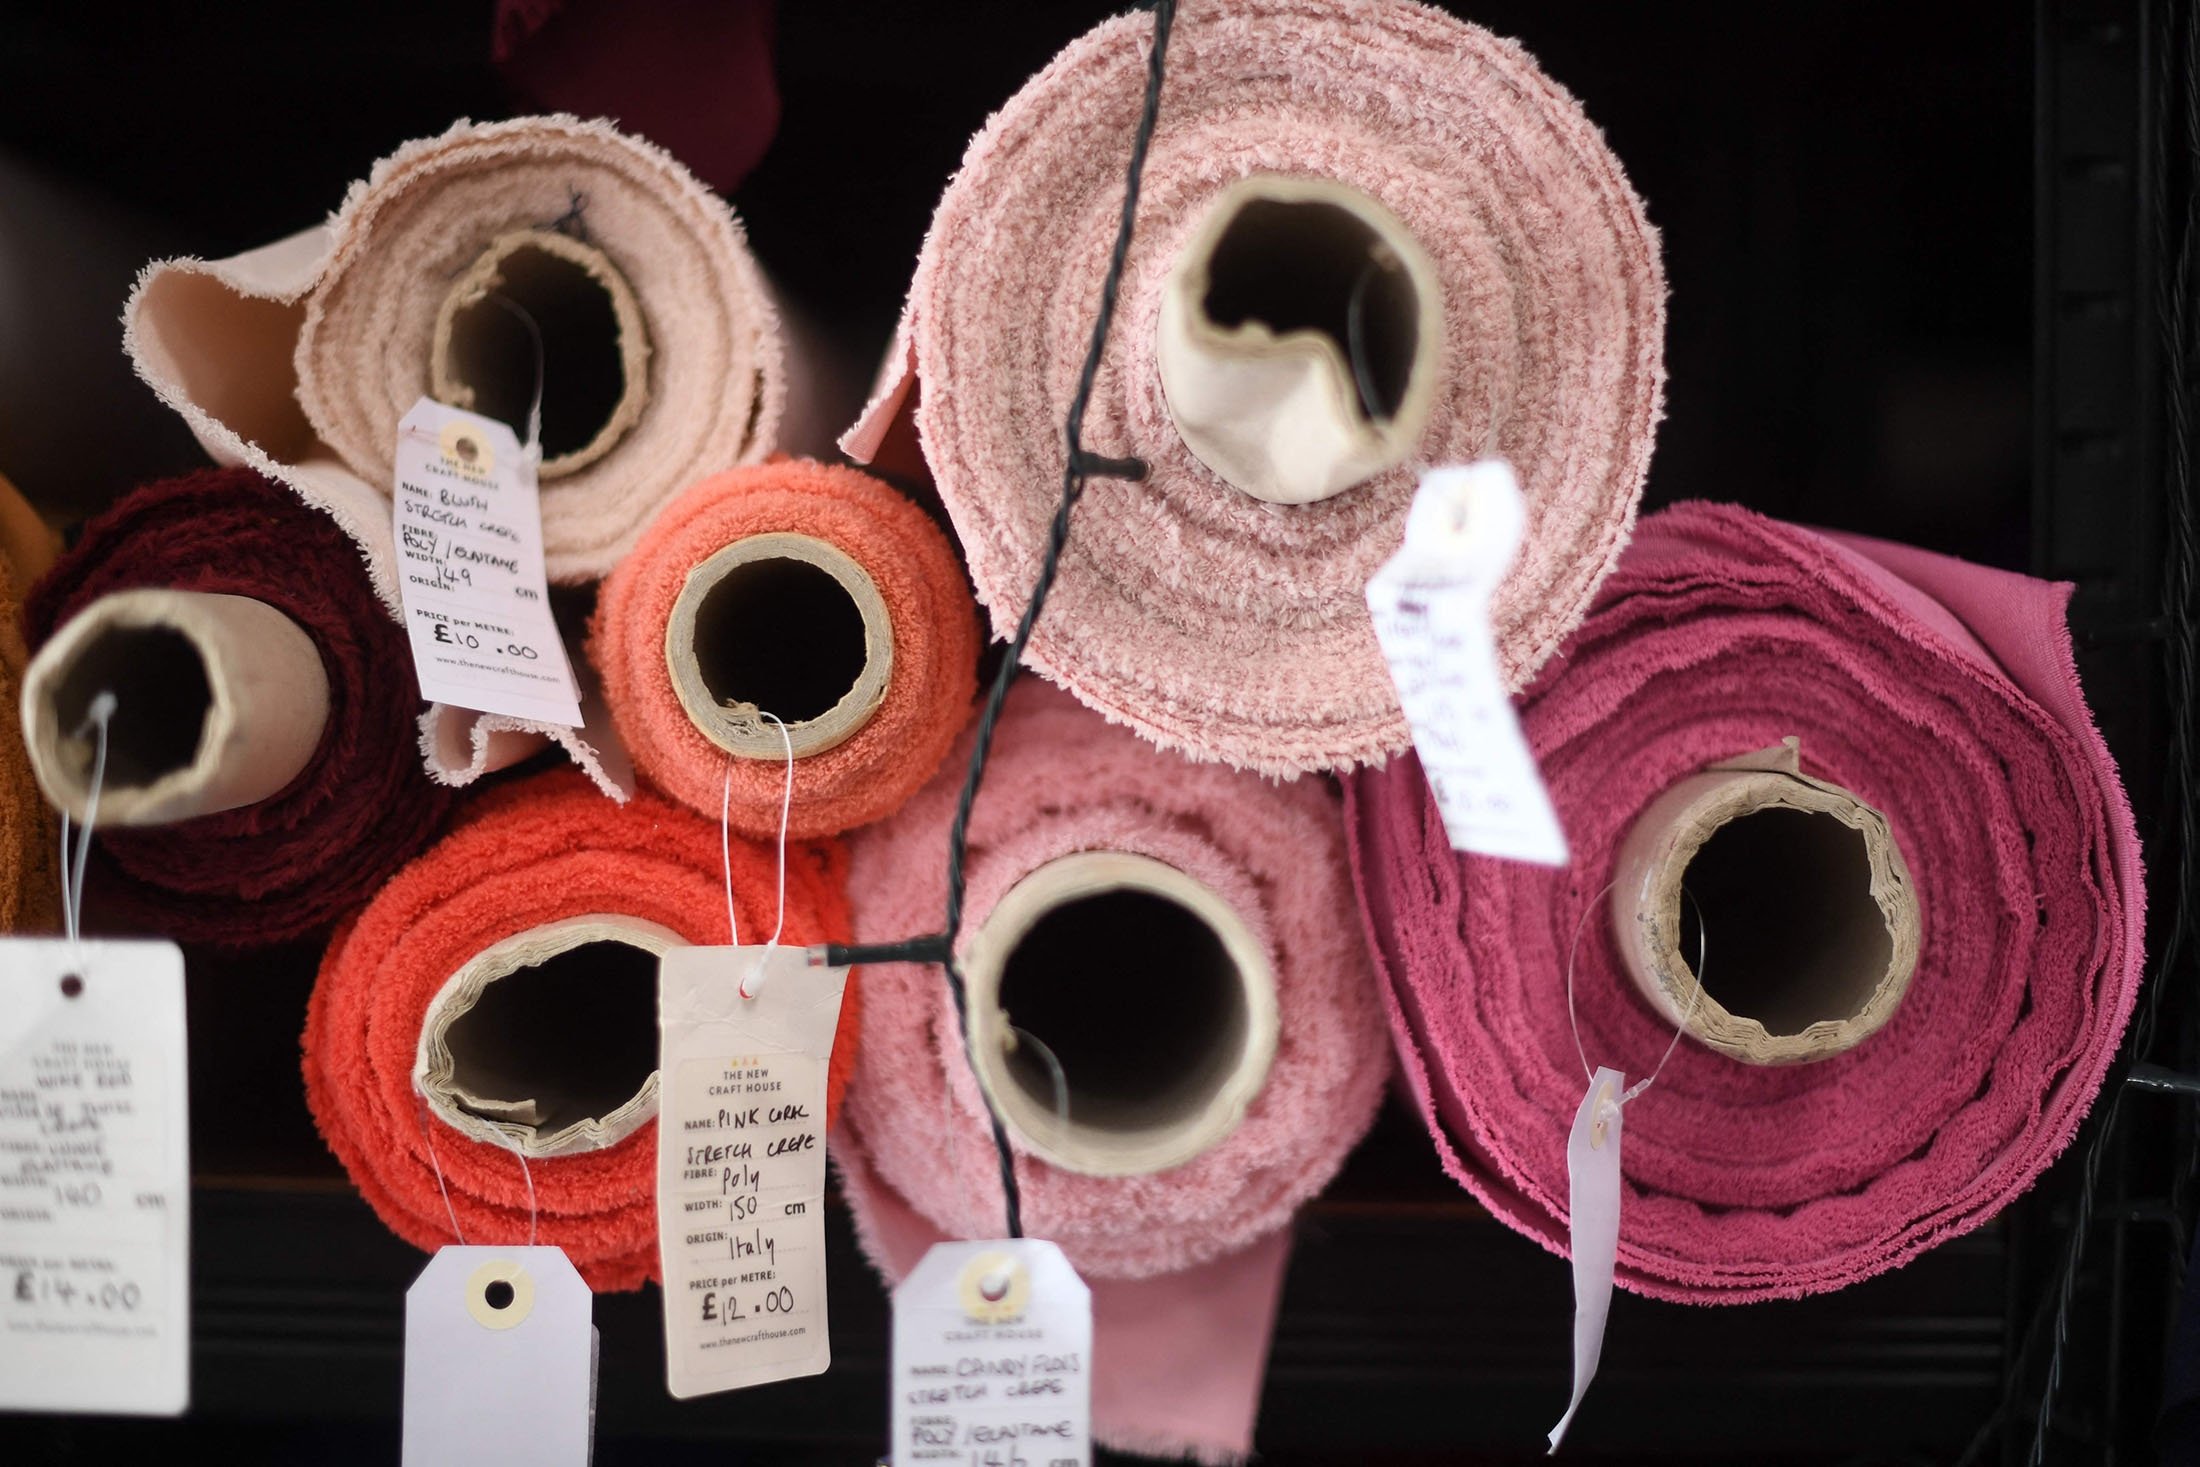 Fabric rolls and their labels displayed at The New Craft House, a sewing workshop studio and designer deadstock fabric shop, in Hackney, East London, U.K., Feb. 11, 2022. (AFP Photo)